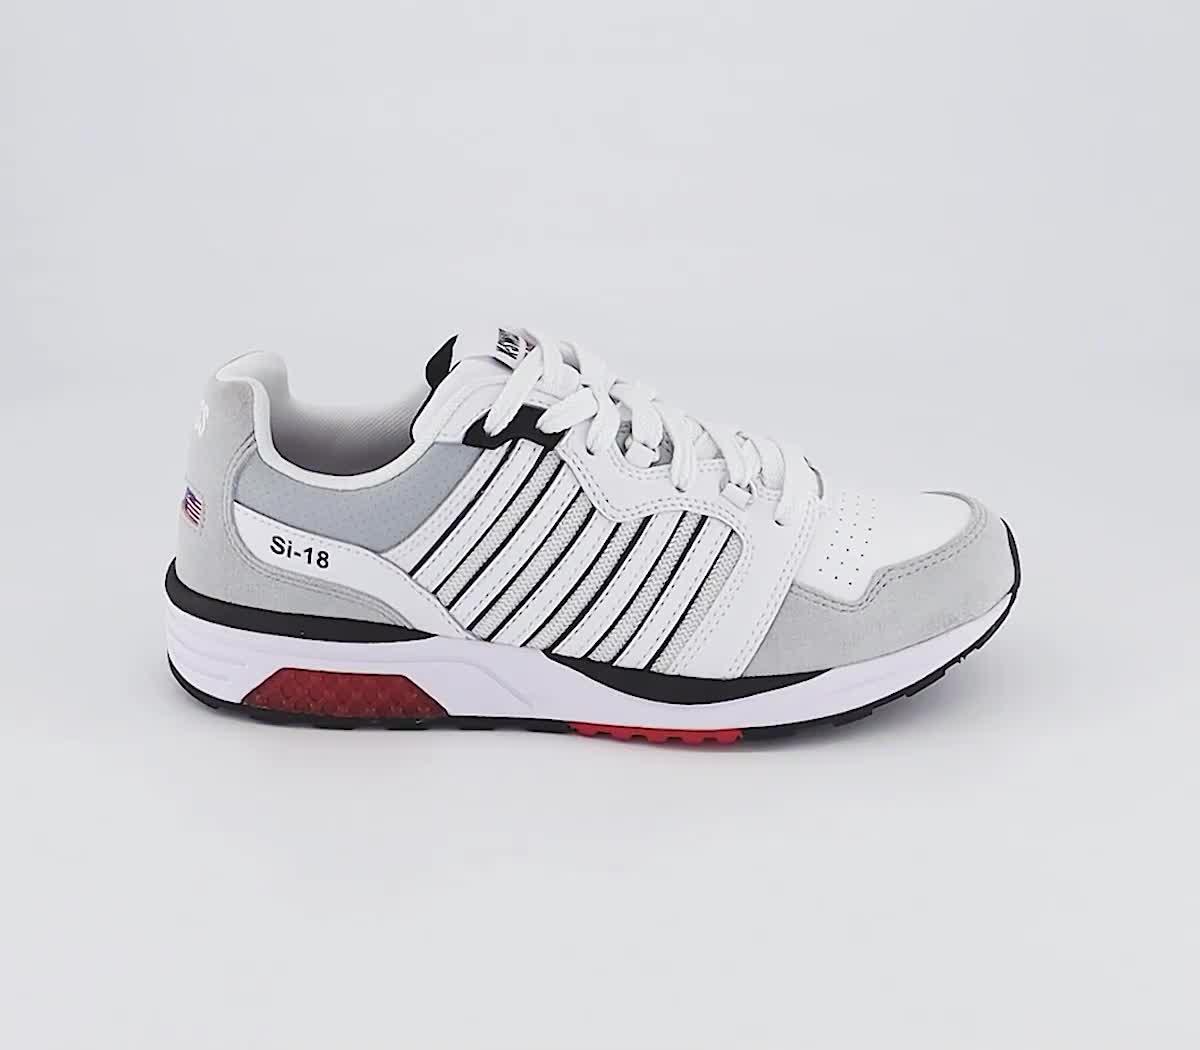 Verdwijnen Compliment boog K-Swiss Si-18 Rannell Sde Usa Trainers White Black Red - Men's Trainers